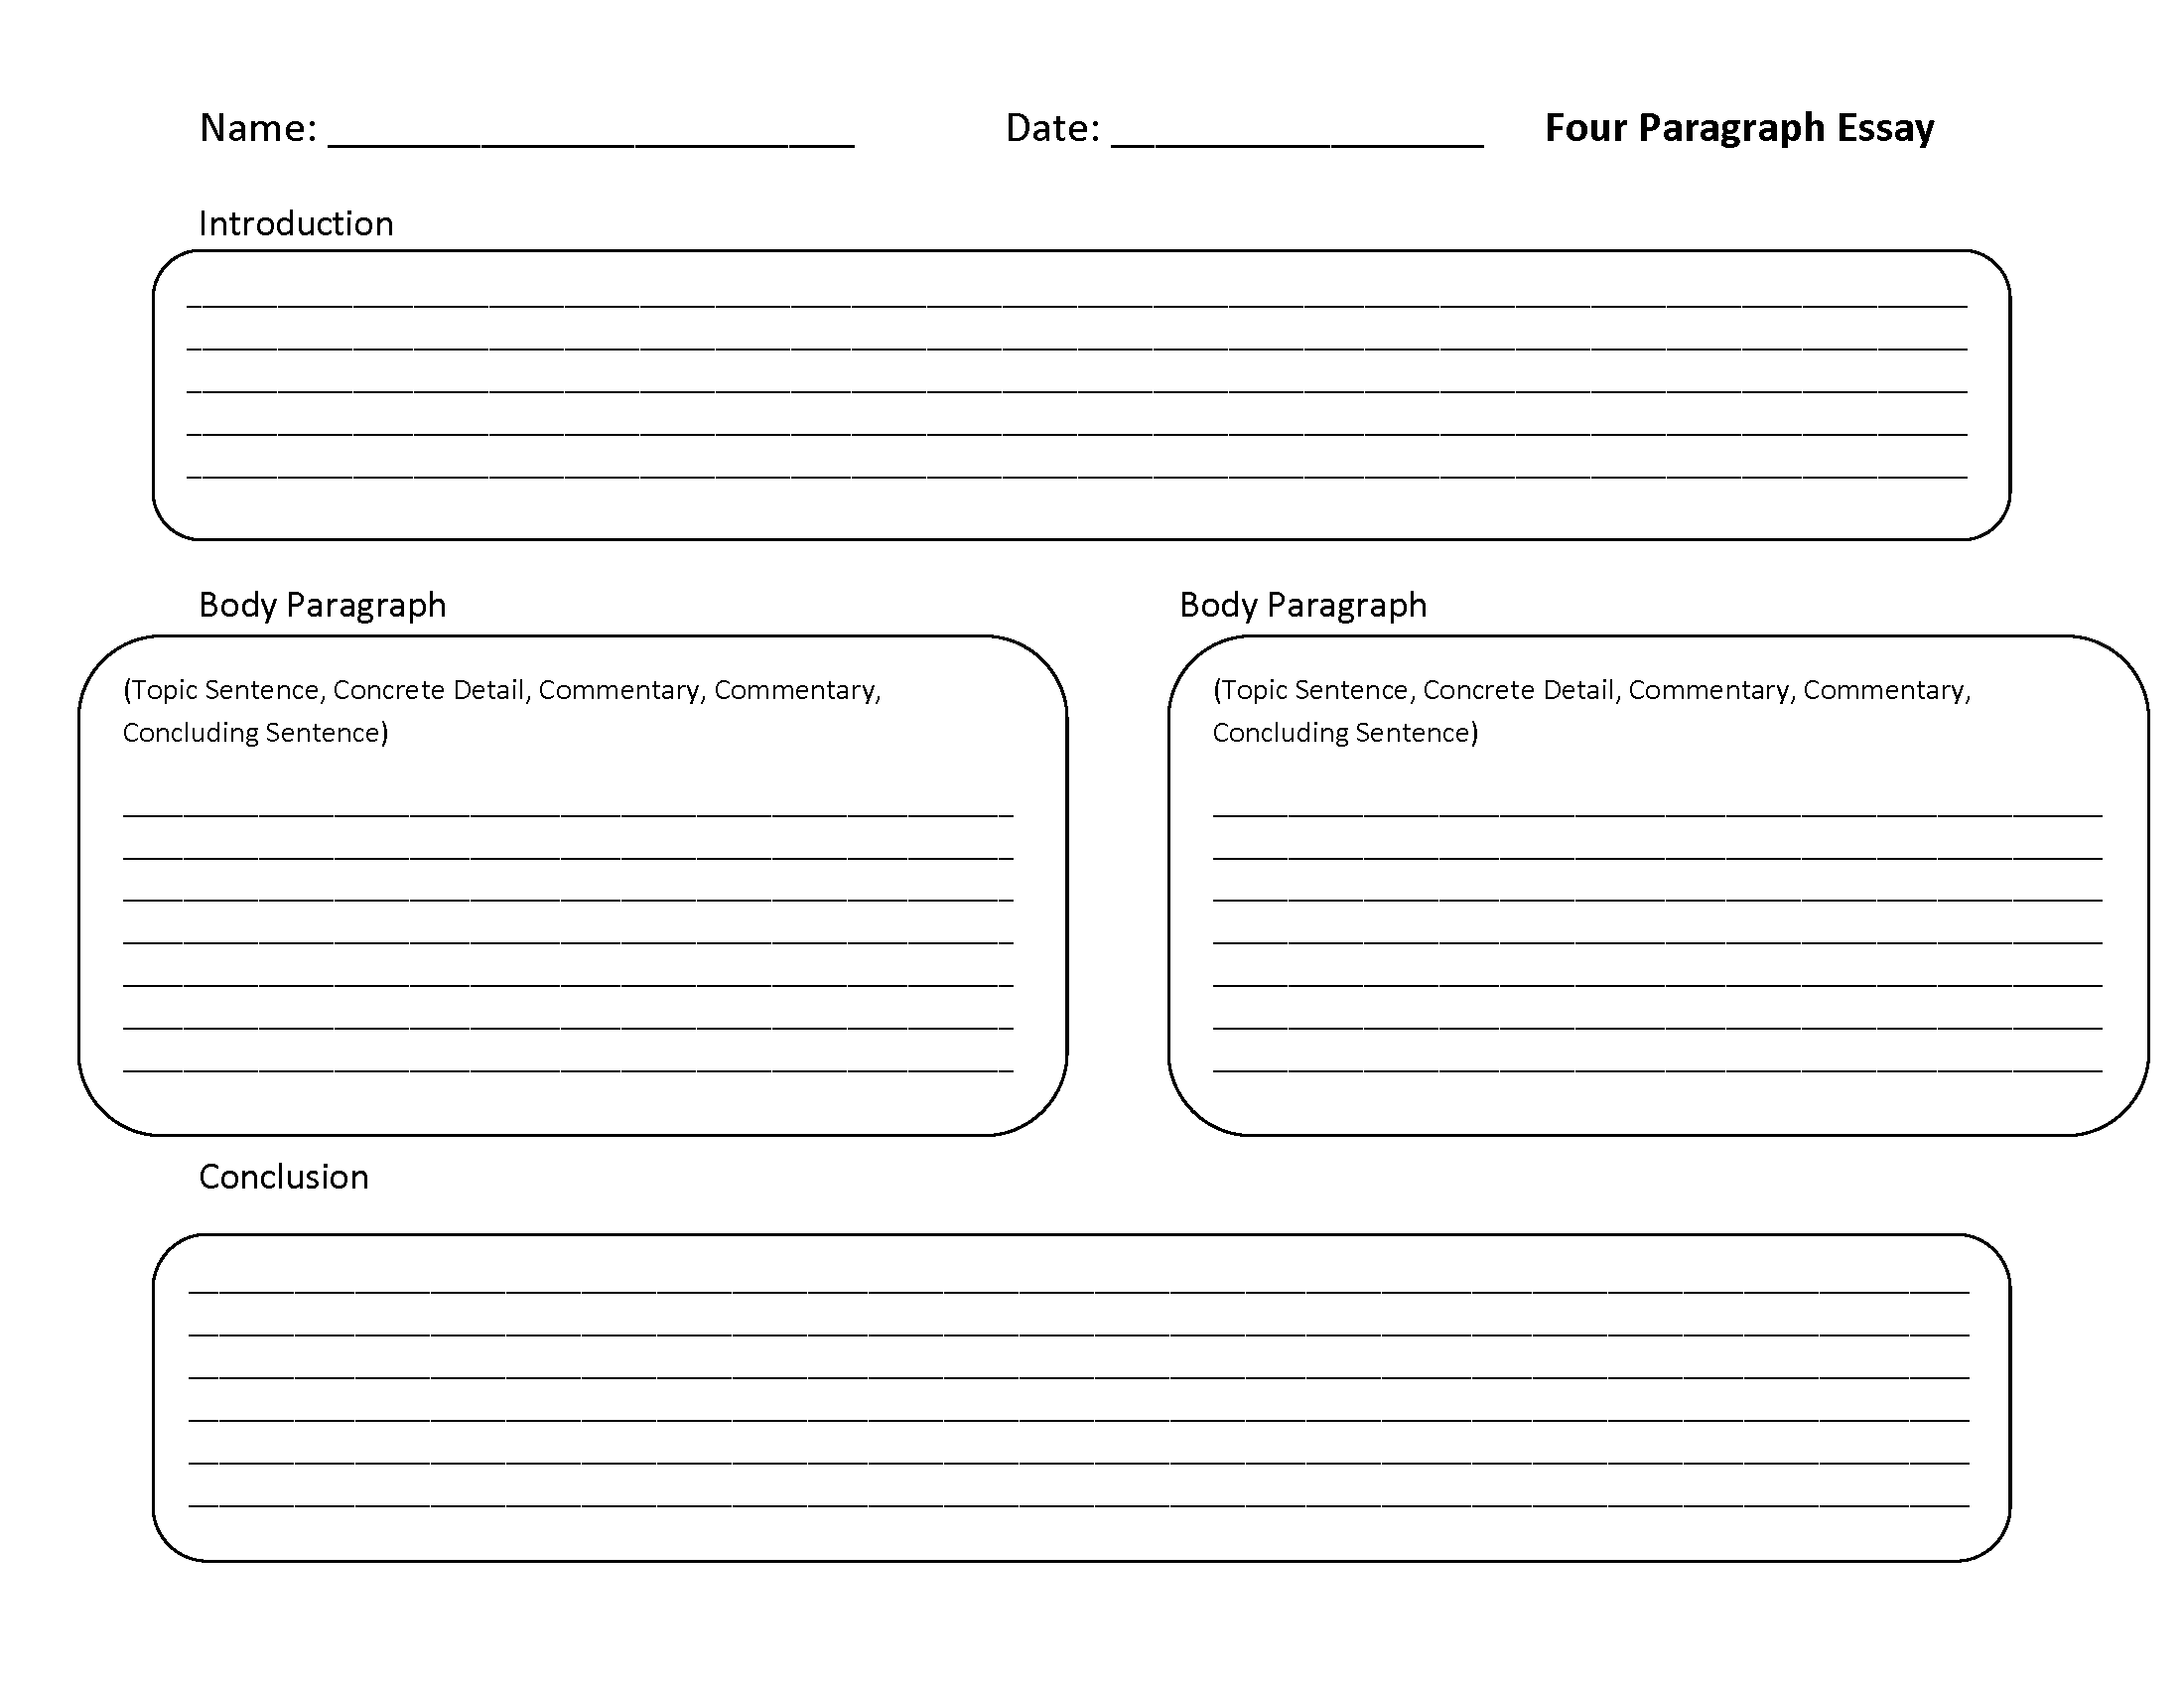 Four Paragraph Writing Template Worksheet